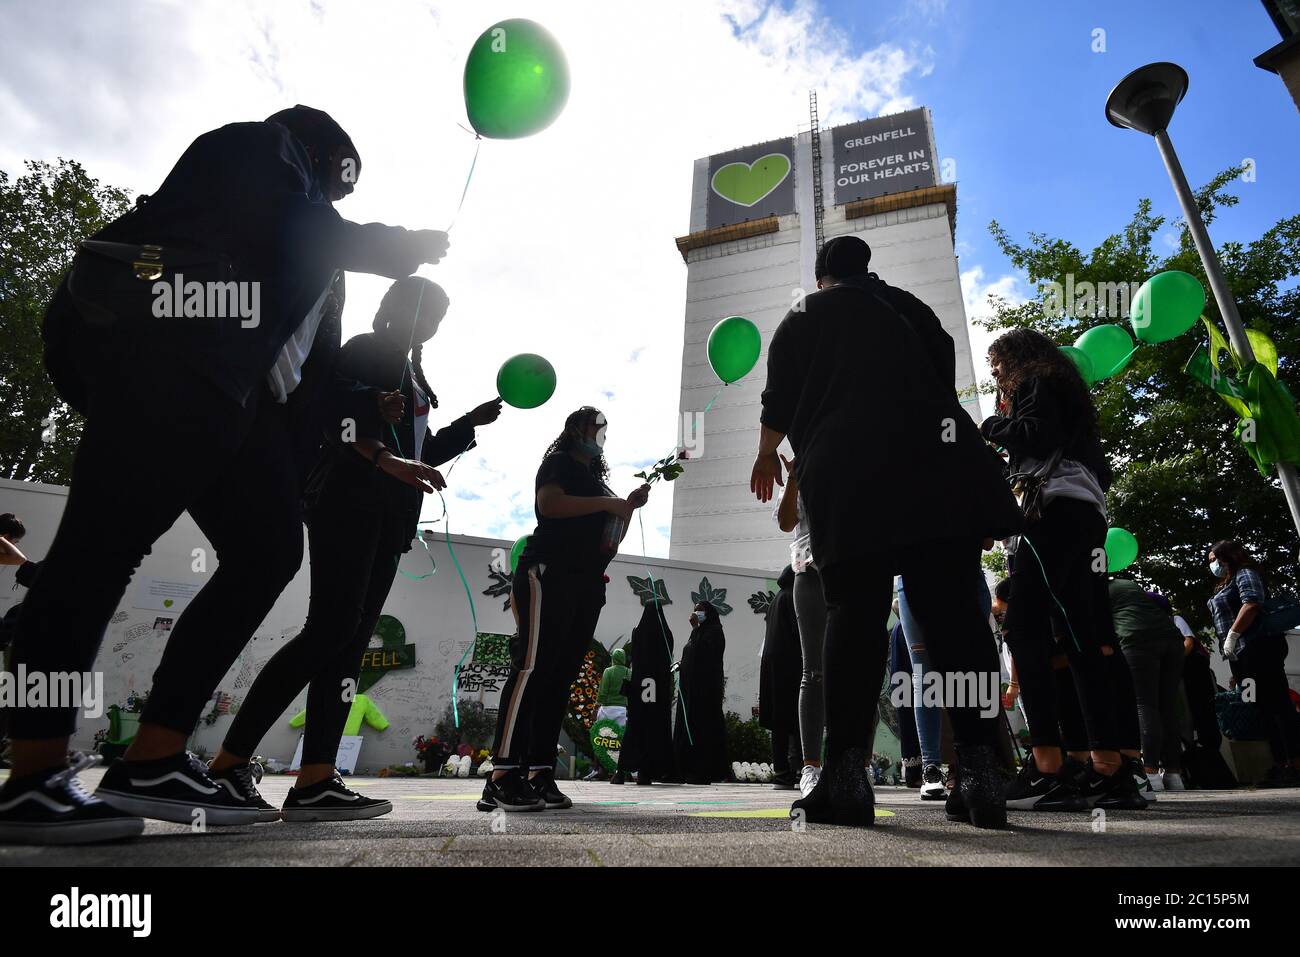 People release balloons at the Grenfell Memorial Community Mosaic at the base of the tower block in London on the third anniversary of the Grenfell Tower fire which claimed 72 lives on June 14 2017. Stock Photo